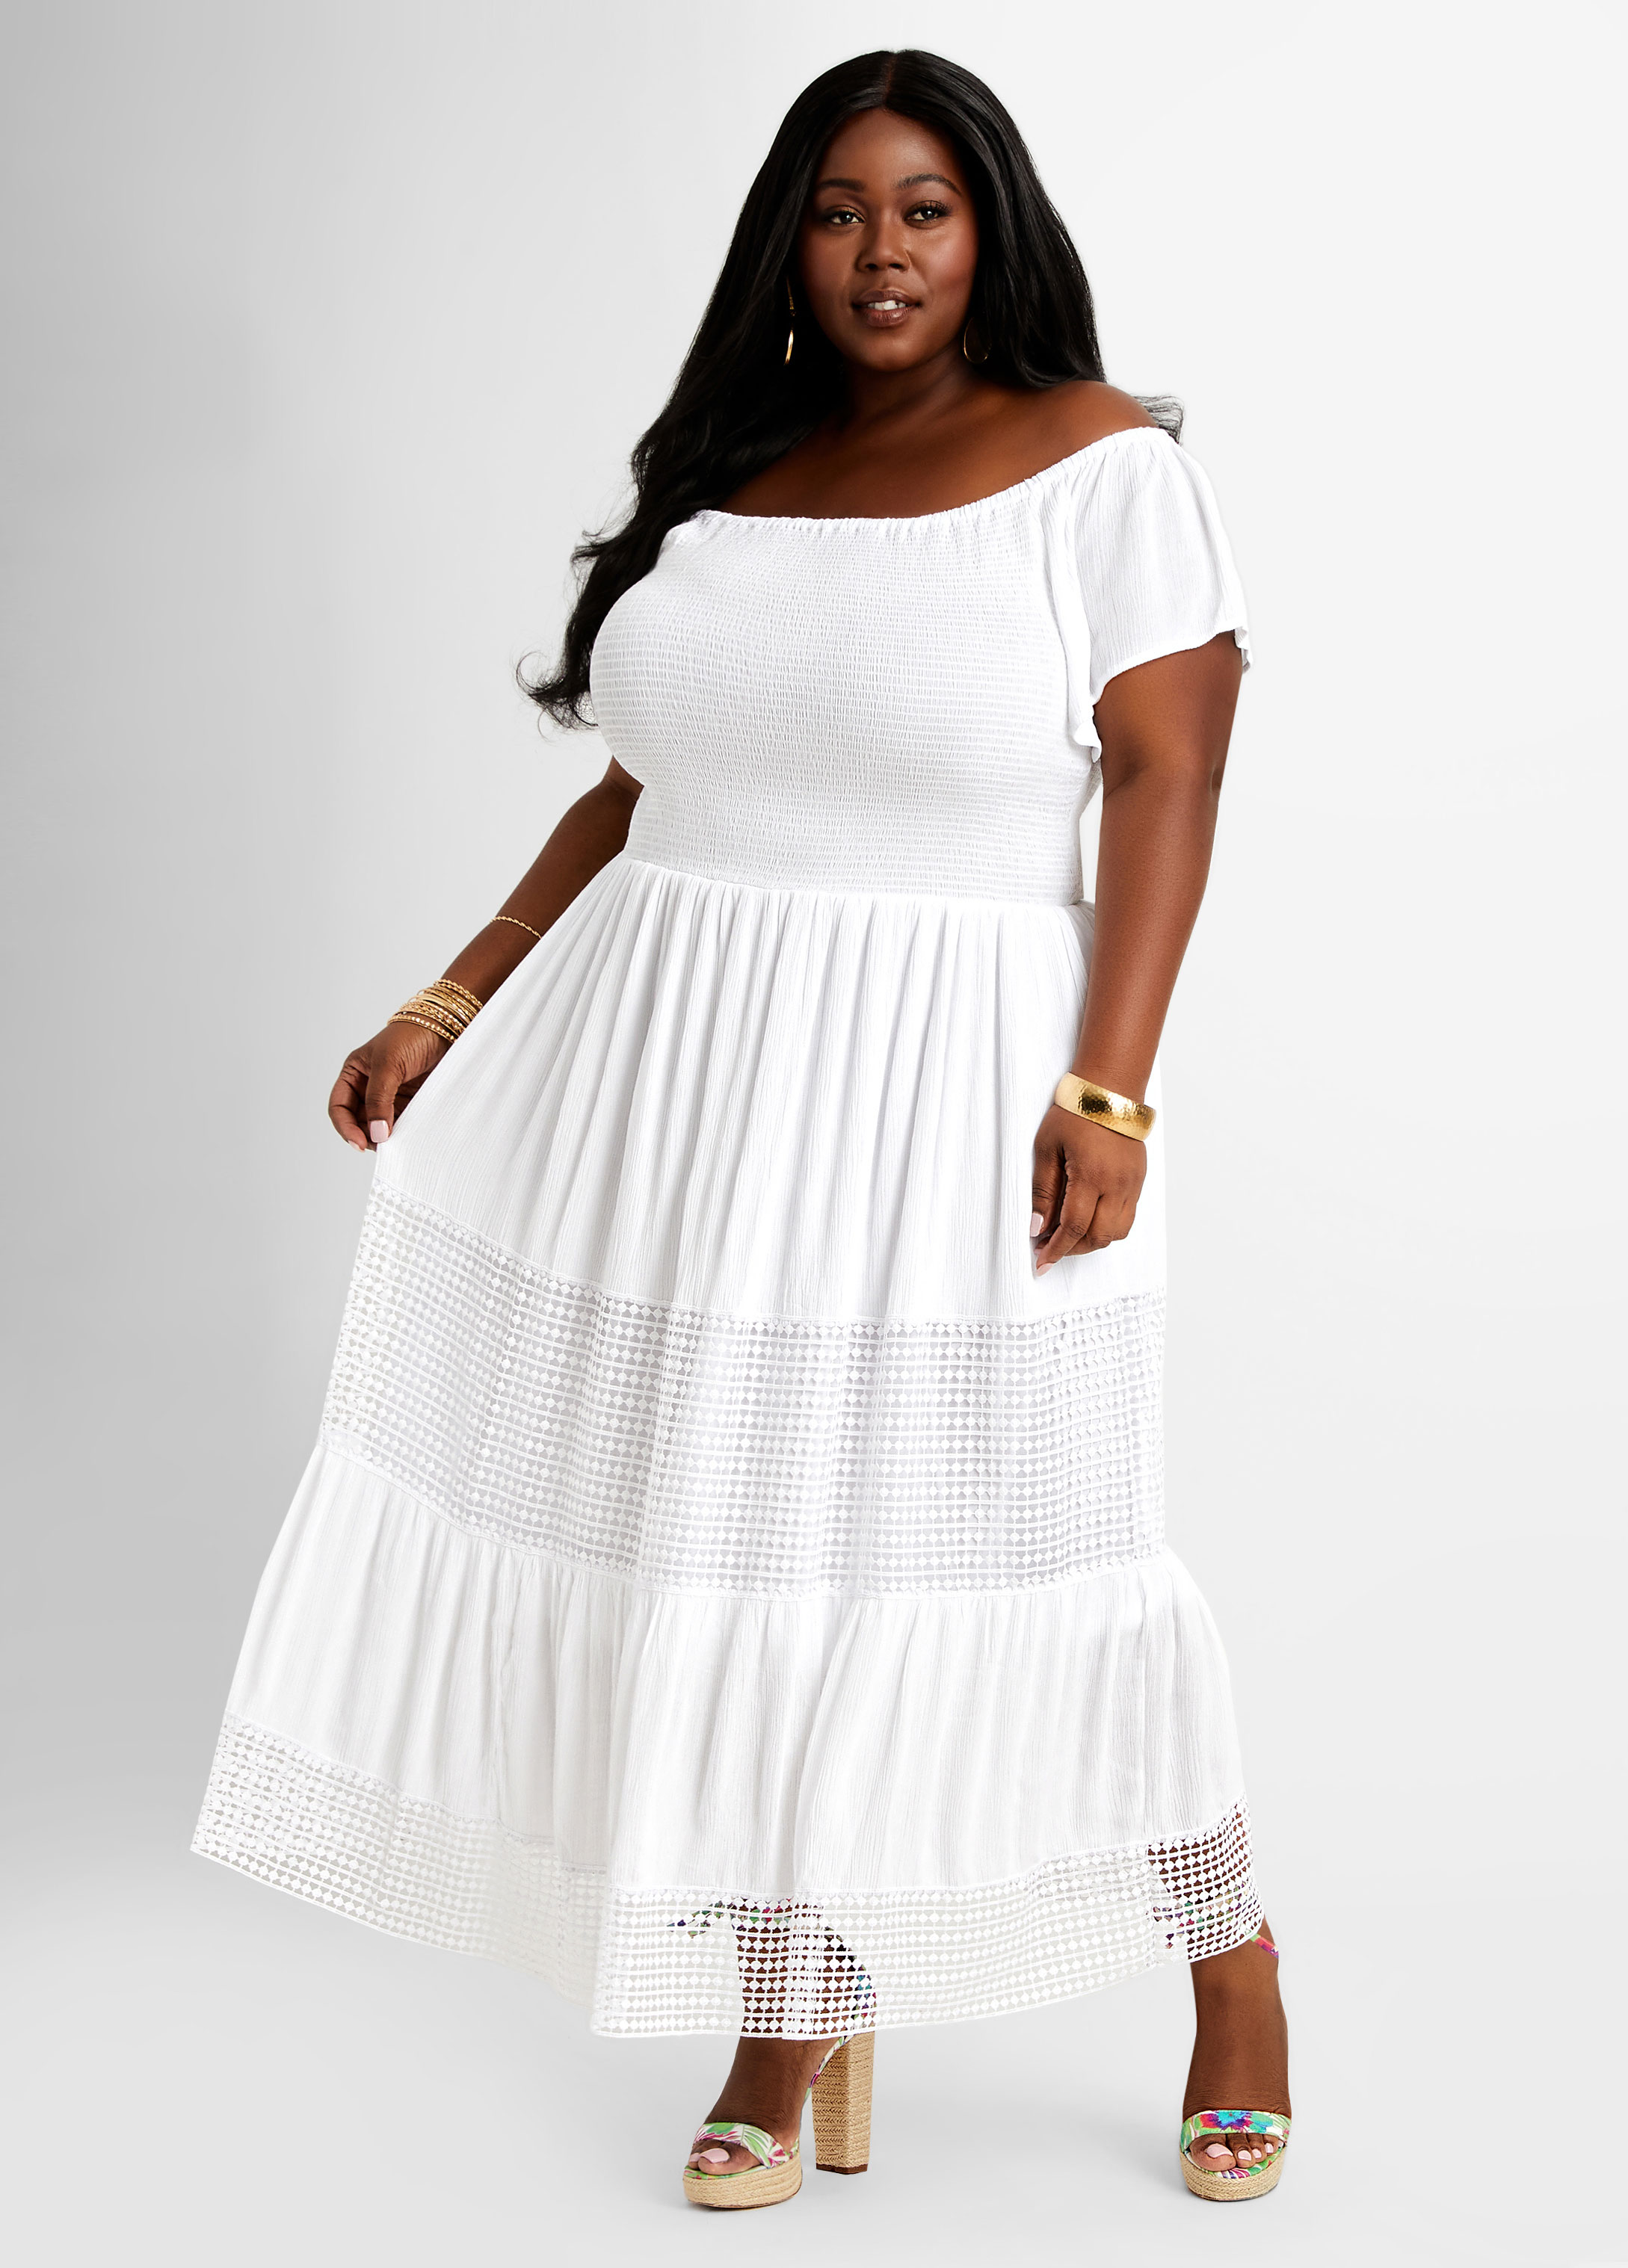 Plus Size Ivory Lace Tiered Maxi Dress Torrid, 46% OFF